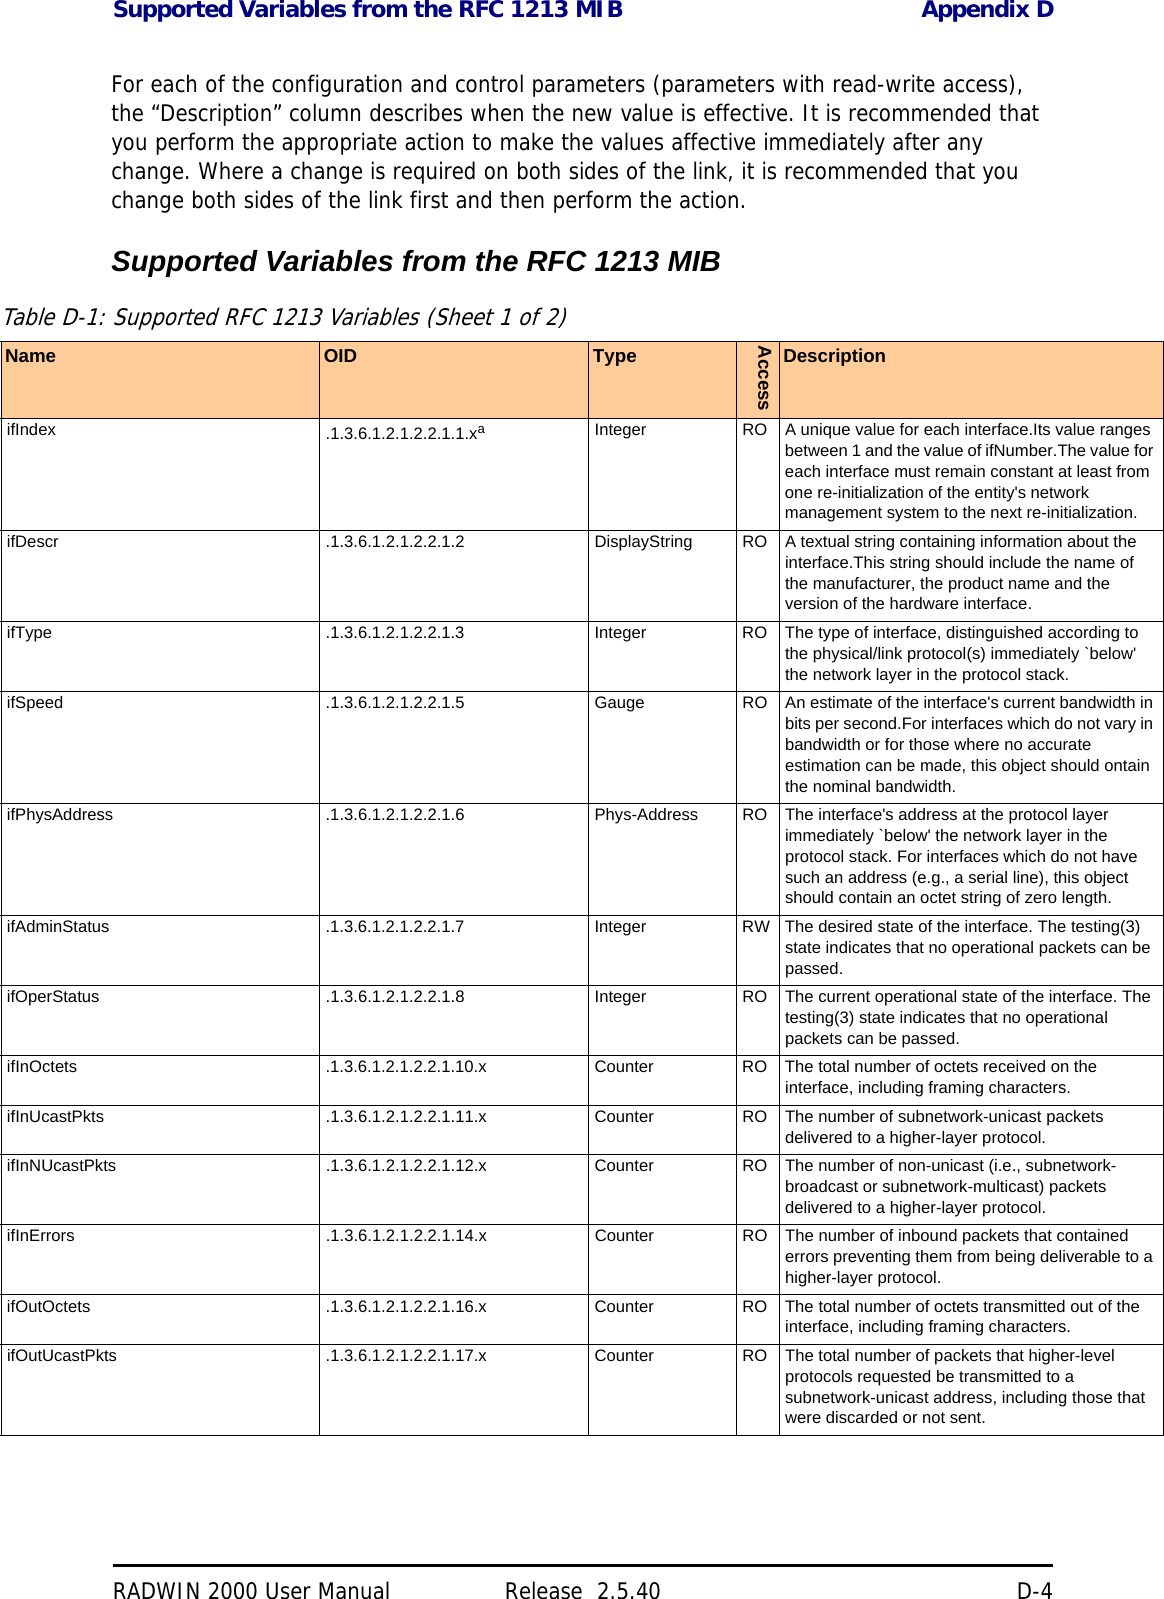 Supported Variables from the RFC 1213 MIB Appendix DRADWIN 2000 User Manual Release  2.5.40 D-4For each of the configuration and control parameters (parameters with read-write access), the “Description” column describes when the new value is effective. It is recommended that you perform the appropriate action to make the values affective immediately after any change. Where a change is required on both sides of the link, it is recommended that you change both sides of the link first and then perform the action.Supported Variables from the RFC 1213 MIBTable D-1: Supported RFC 1213 Variables (Sheet 1 of 2)Name OID TypeAccessDescriptionifIndex .1.3.6.1.2.1.2.2.1.1.xaInteger RO A unique value for each interface.Its value ranges between 1 and the value of ifNumber.The value for each interface must remain constant at least from one re-initialization of the entity&apos;s network management system to the next re-initialization.ifDescr .1.3.6.1.2.1.2.2.1.2 DisplayString RO A textual string containing information about the interface.This string should include the name of the manufacturer, the product name and the version of the hardware interface.ifType .1.3.6.1.2.1.2.2.1.3 Integer RO The type of interface, distinguished according to the physical/link protocol(s) immediately `below&apos; the network layer in the protocol stack.ifSpeed .1.3.6.1.2.1.2.2.1.5 Gauge RO An estimate of the interface&apos;s current bandwidth in bits per second.For interfaces which do not vary in bandwidth or for those where no accurate estimation can be made, this object should ontain the nominal bandwidth.ifPhysAddress .1.3.6.1.2.1.2.2.1.6 Phys-Address RO The interface&apos;s address at the protocol layer immediately `below&apos; the network layer in the protocol stack. For interfaces which do not have such an address (e.g., a serial line), this object should contain an octet string of zero length.ifAdminStatus .1.3.6.1.2.1.2.2.1.7 Integer RW The desired state of the interface. The testing(3) state indicates that no operational packets can be passed.ifOperStatus .1.3.6.1.2.1.2.2.1.8 Integer RO The current operational state of the interface. The testing(3) state indicates that no operational packets can be passed.ifInOctets .1.3.6.1.2.1.2.2.1.10.x Counter RO The total number of octets received on the interface, including framing characters.ifInUcastPkts .1.3.6.1.2.1.2.2.1.11.x Counter RO The number of subnetwork-unicast packets delivered to a higher-layer protocol.ifInNUcastPkts .1.3.6.1.2.1.2.2.1.12.x Counter RO The number of non-unicast (i.e., subnetwork- broadcast or subnetwork-multicast) packets delivered to a higher-layer protocol.ifInErrors .1.3.6.1.2.1.2.2.1.14.x Counter RO The number of inbound packets that contained errors preventing them from being deliverable to a higher-layer protocol.ifOutOctets .1.3.6.1.2.1.2.2.1.16.x Counter RO The total number of octets transmitted out of the interface, including framing characters.ifOutUcastPkts .1.3.6.1.2.1.2.2.1.17.x Counter RO The total number of packets that higher-level protocols requested be transmitted to a subnetwork-unicast address, including those that were discarded or not sent.